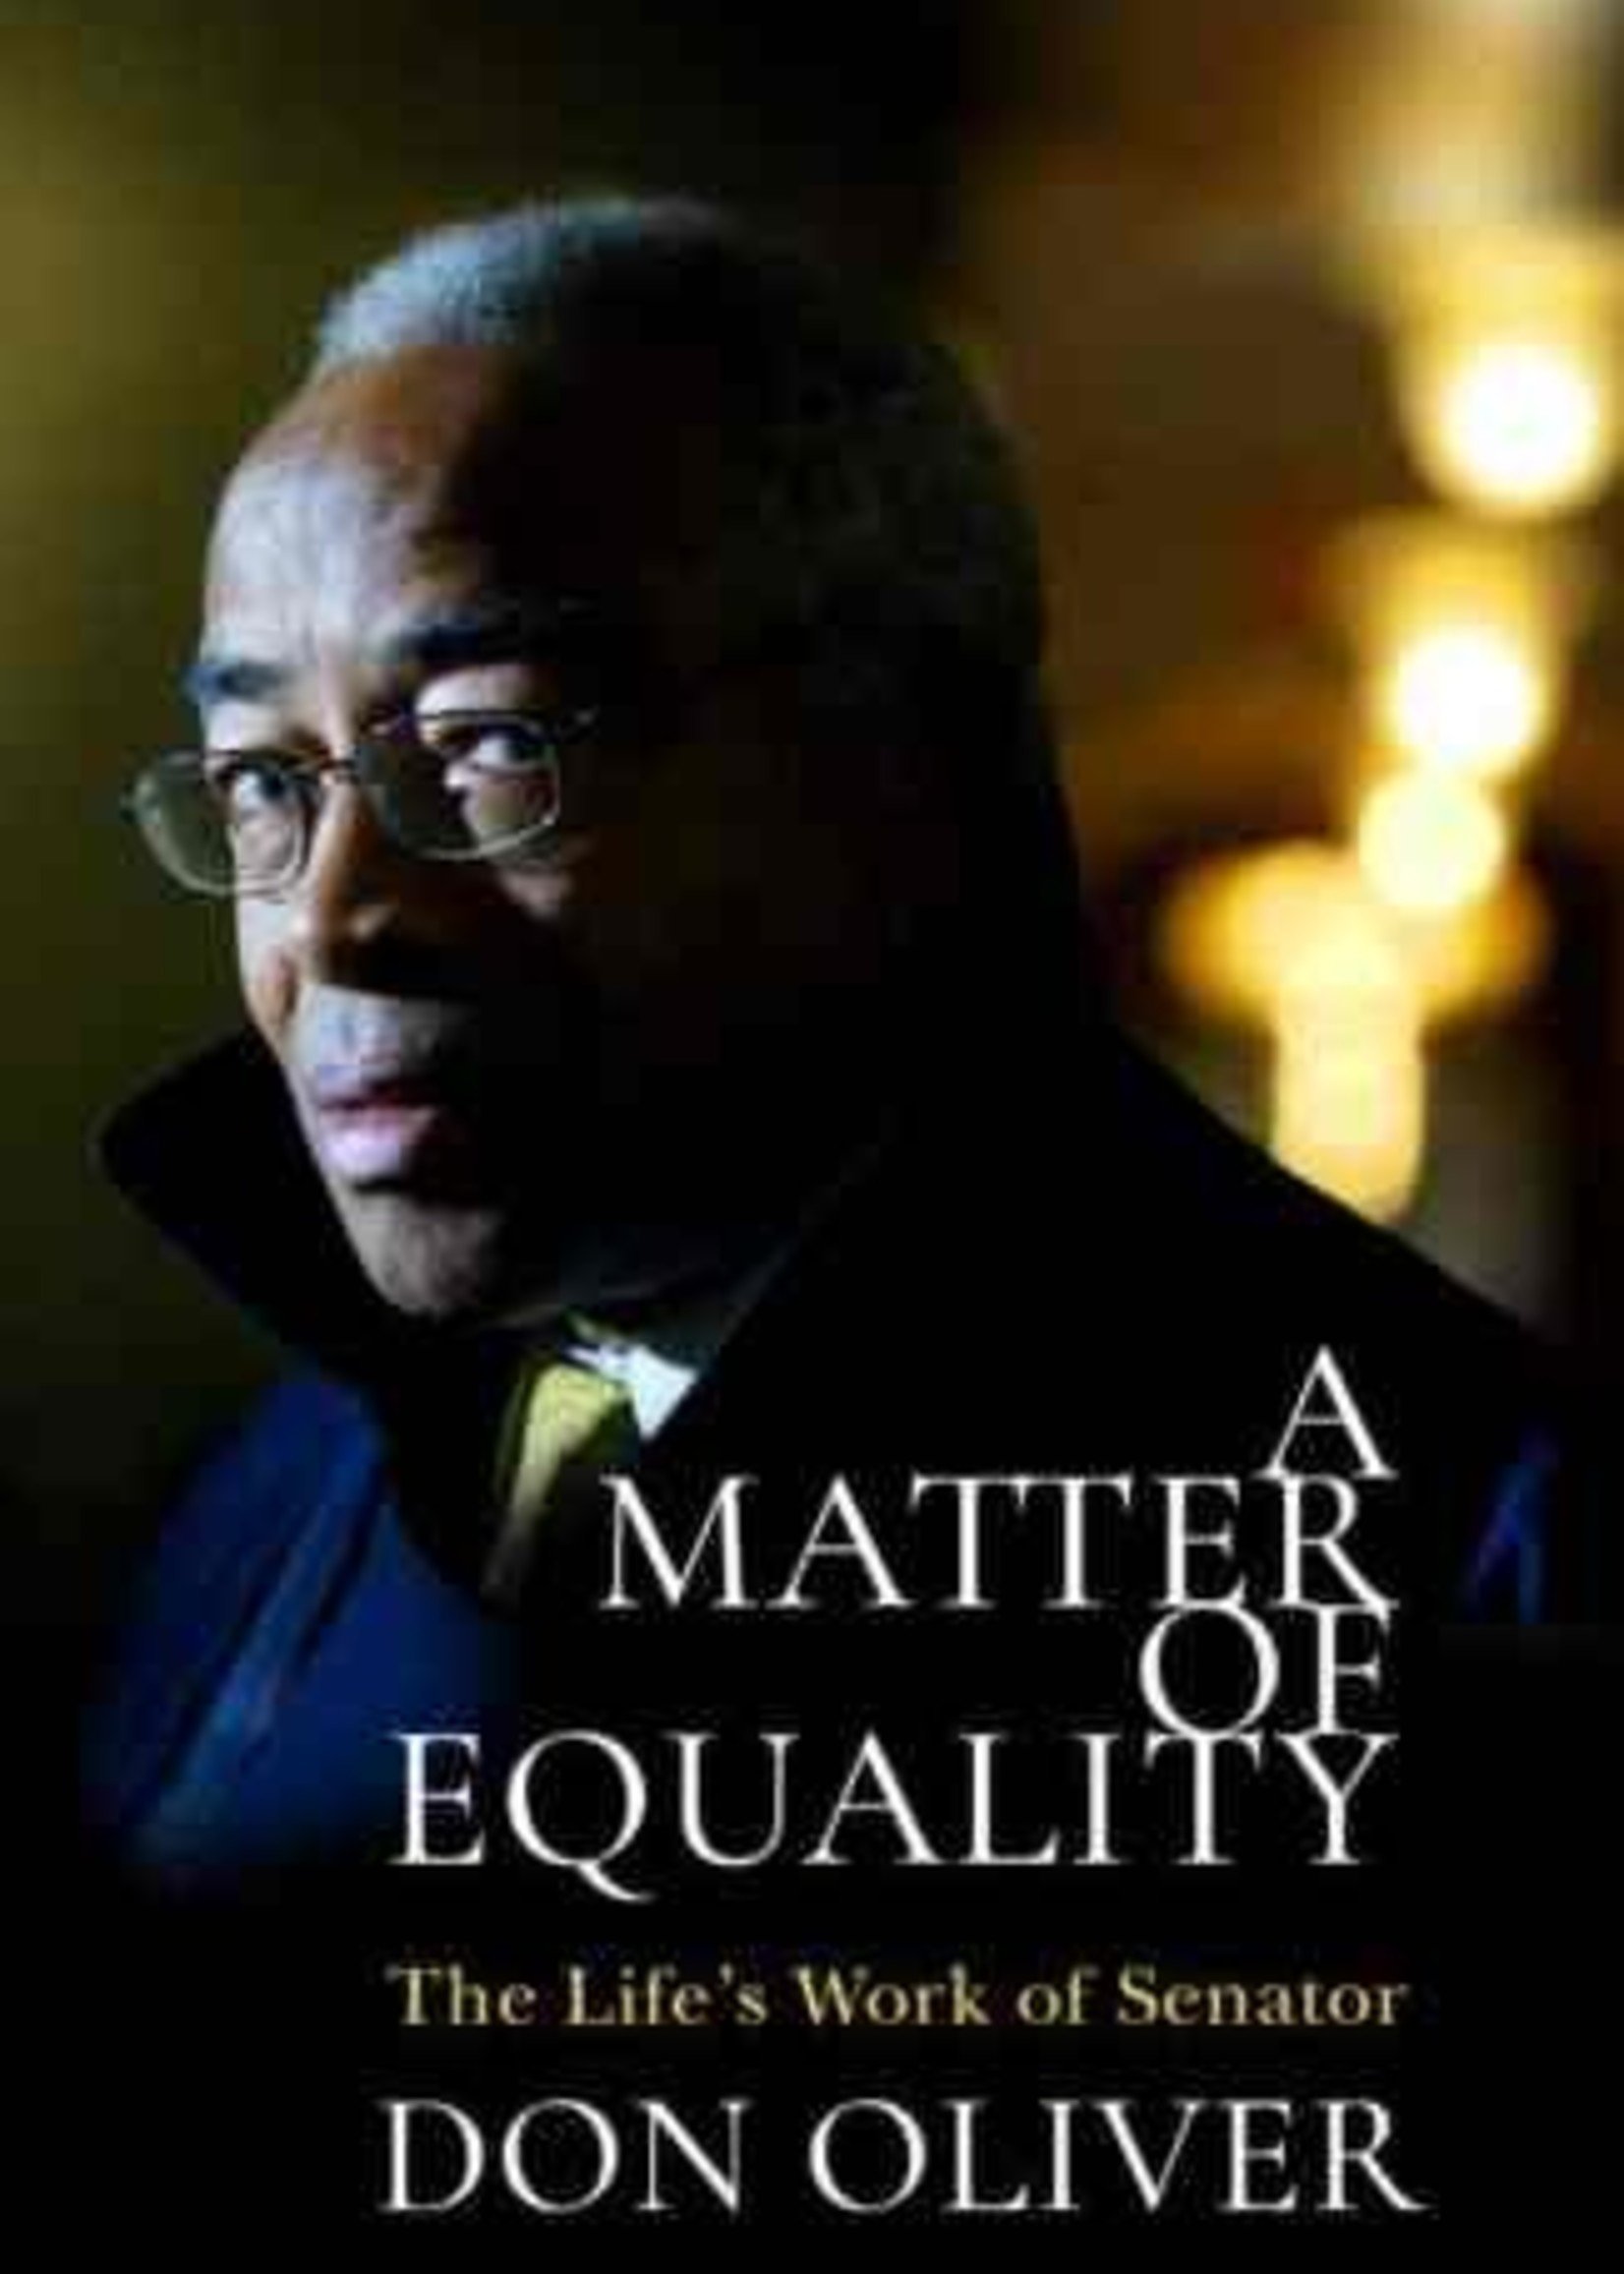 A Matter of Equality: The Life's Work of Senator Don Oliver by Donald Oliver